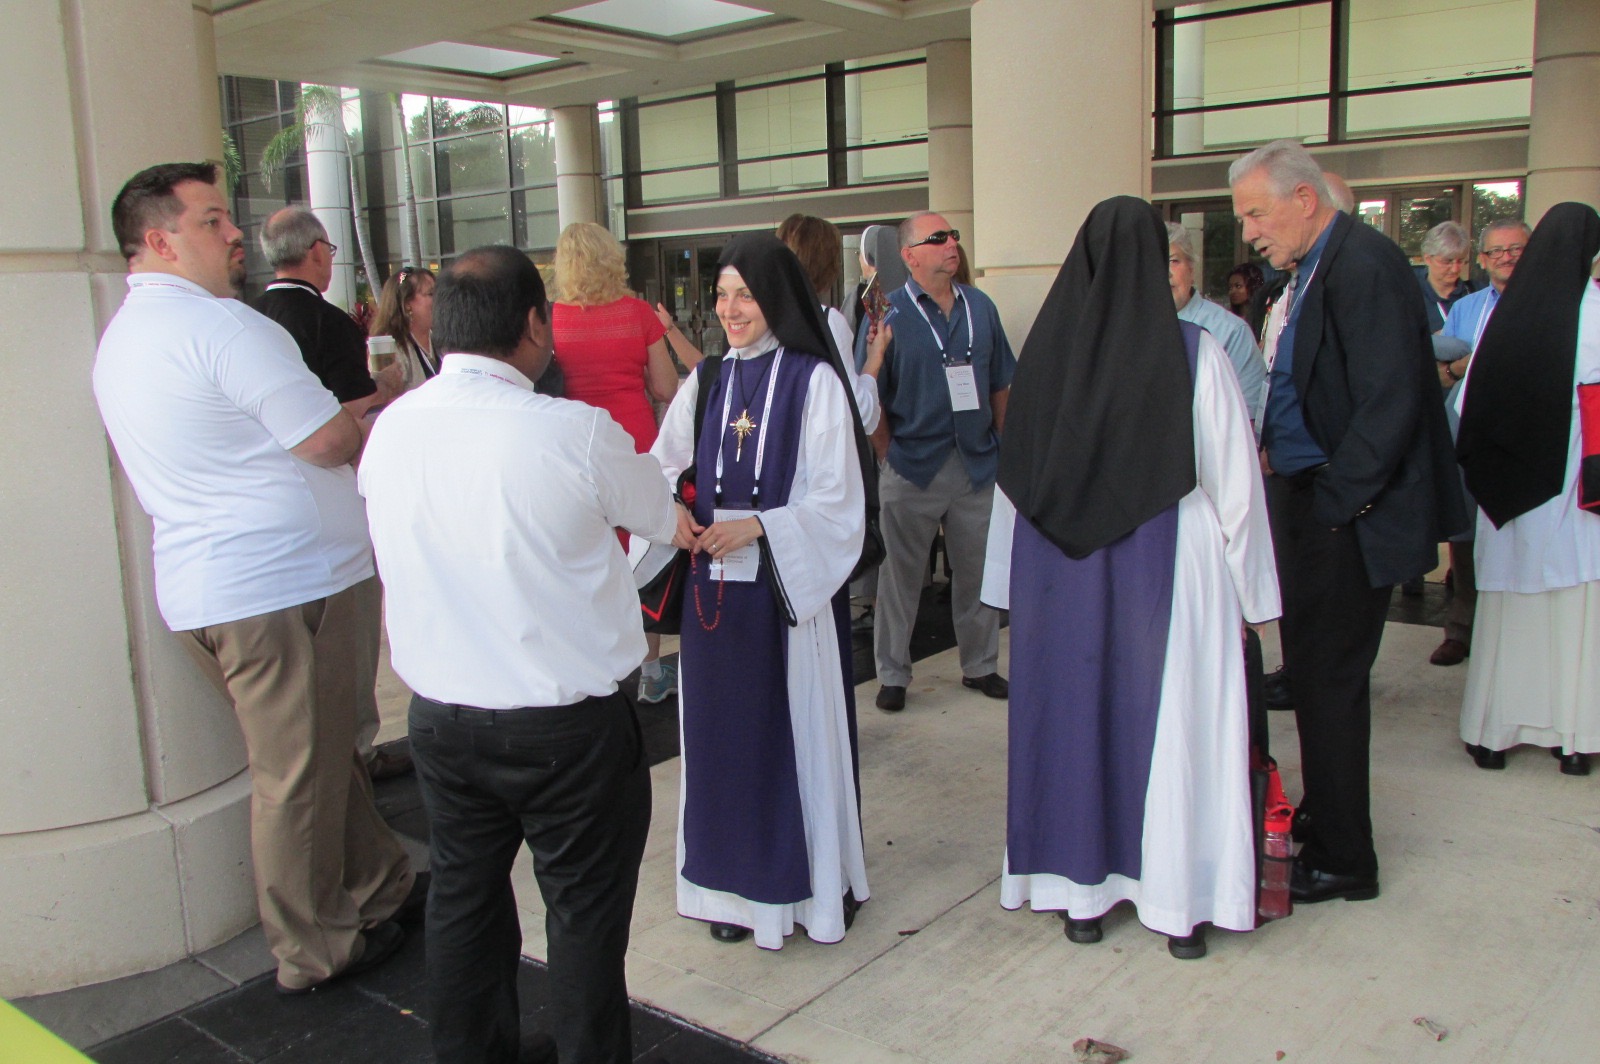 Local Children of Mary Sisters meet others waiting for the Eucharistic procession to begin (CT Photo/Gail Finke)